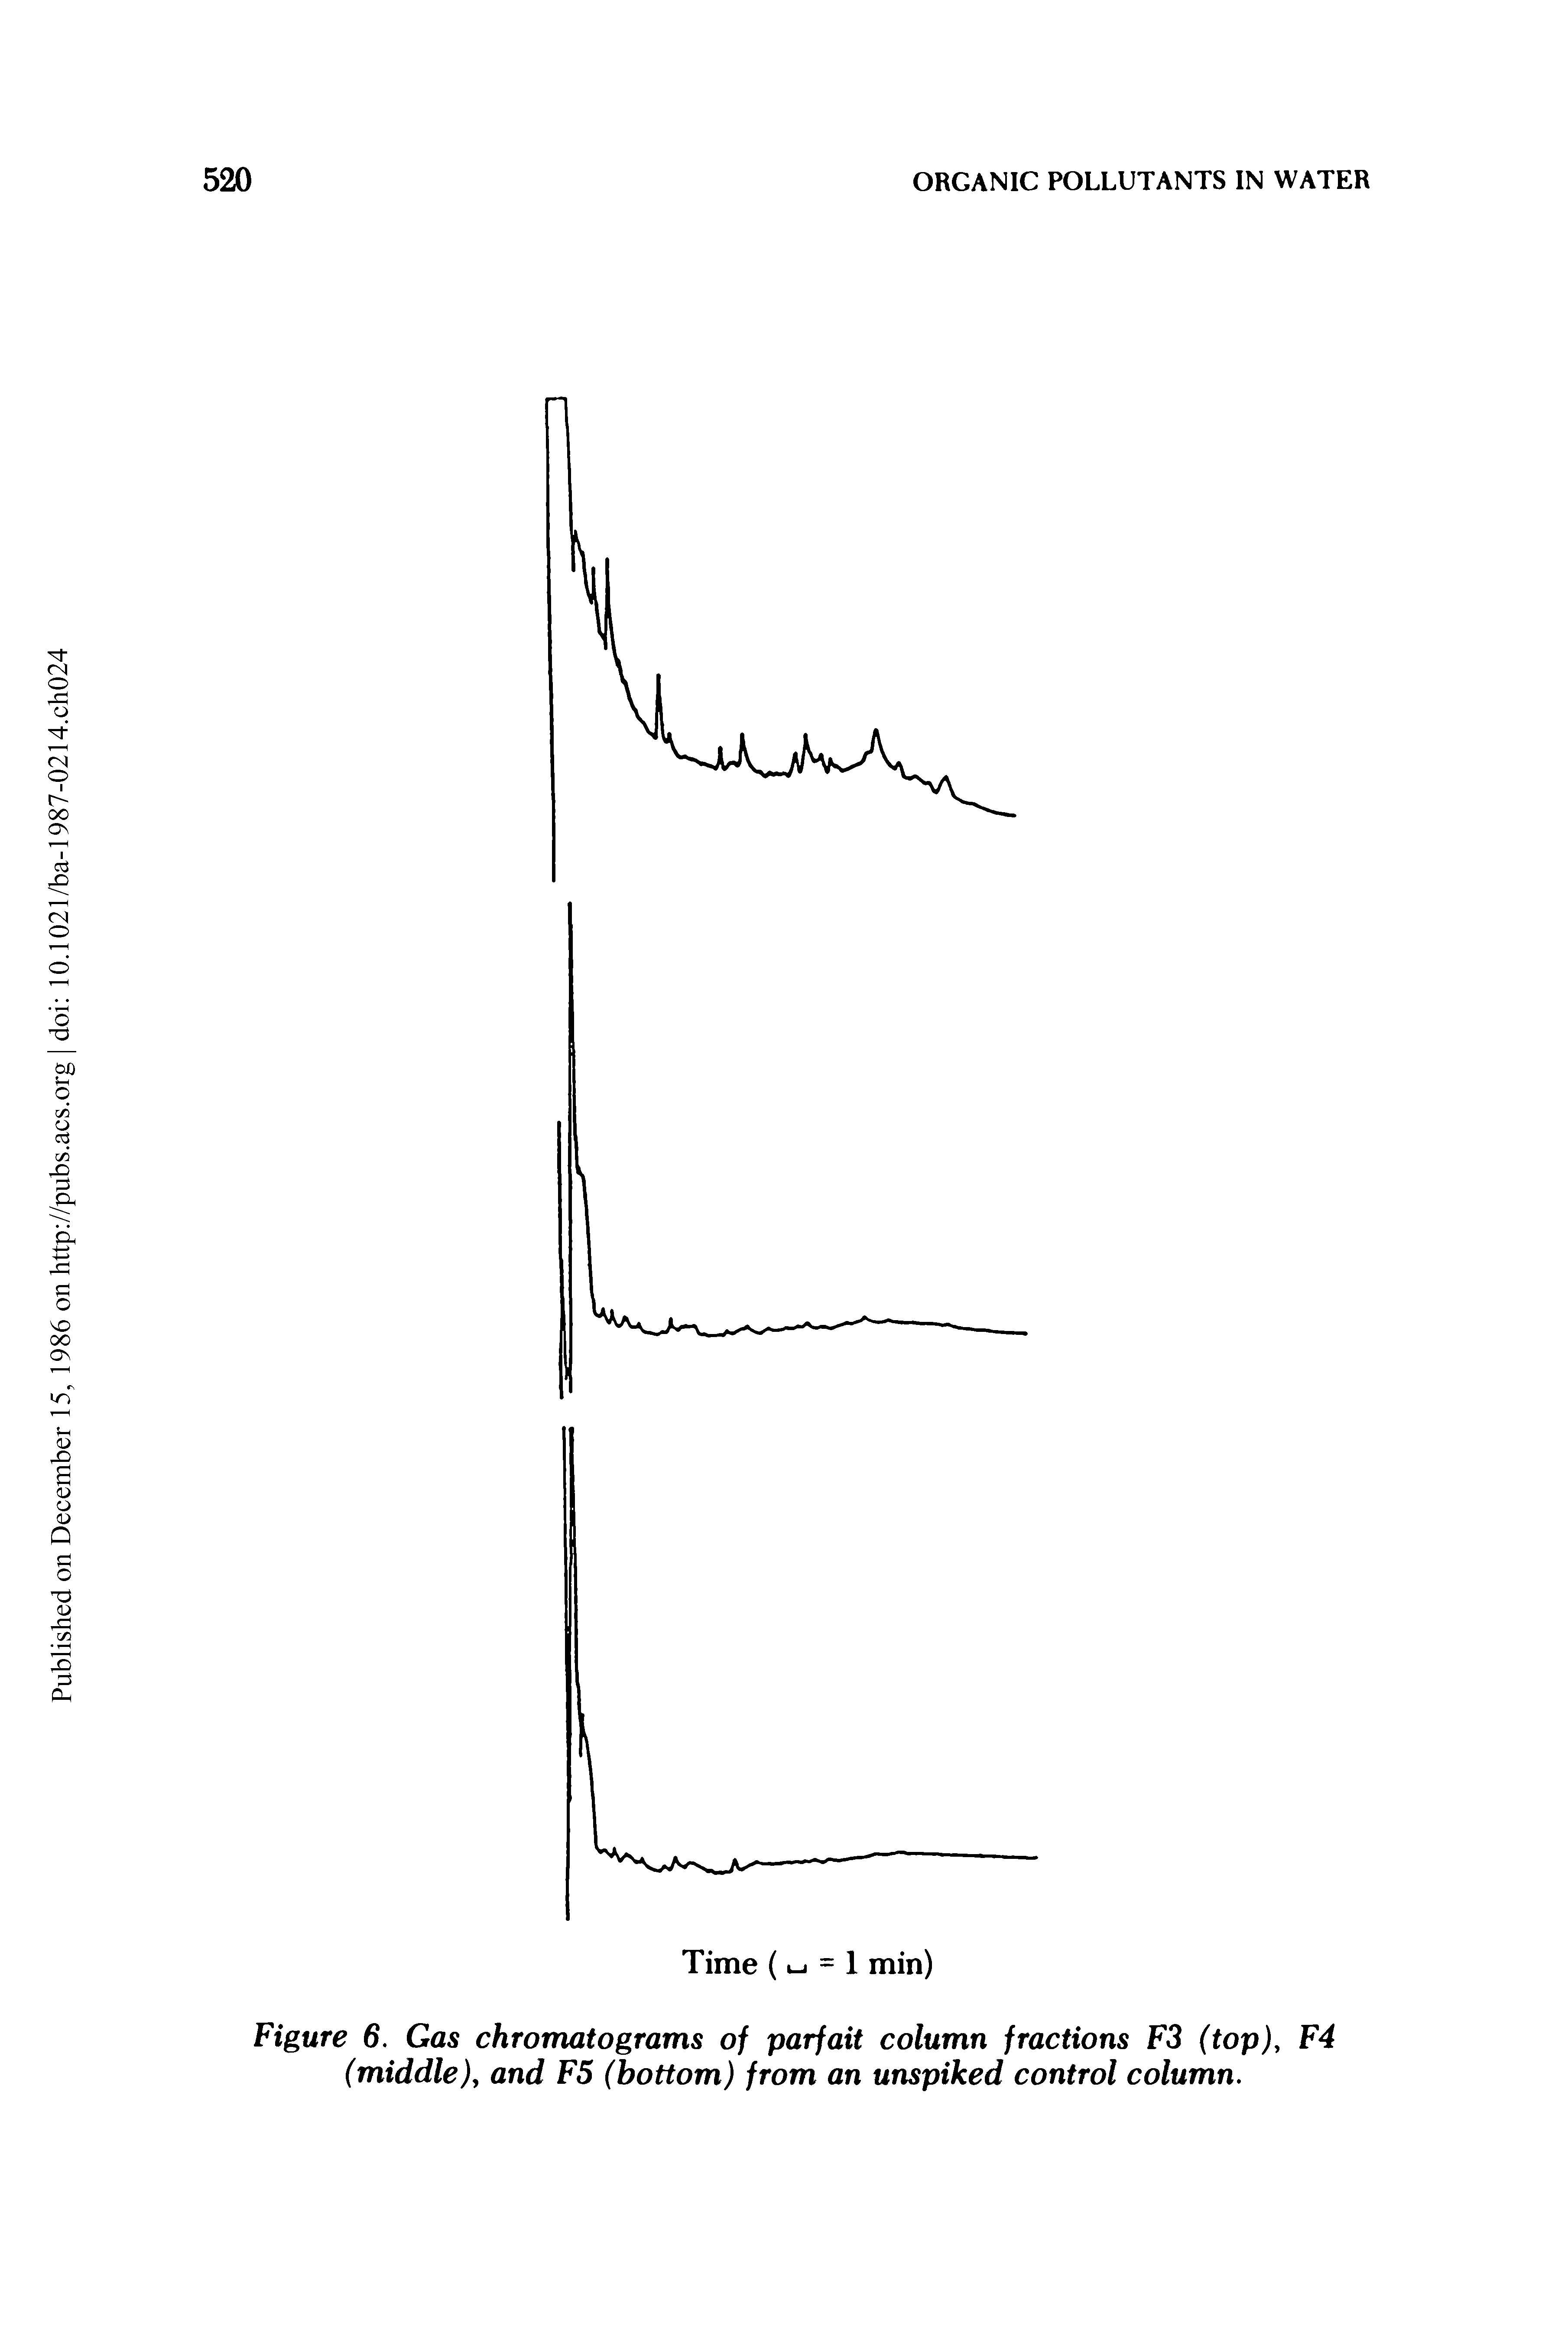 Figure 6. Gas chromatograms of parfait column fractions F3 (top), (middle)y and F5 (bottom) from an unspiked control column.